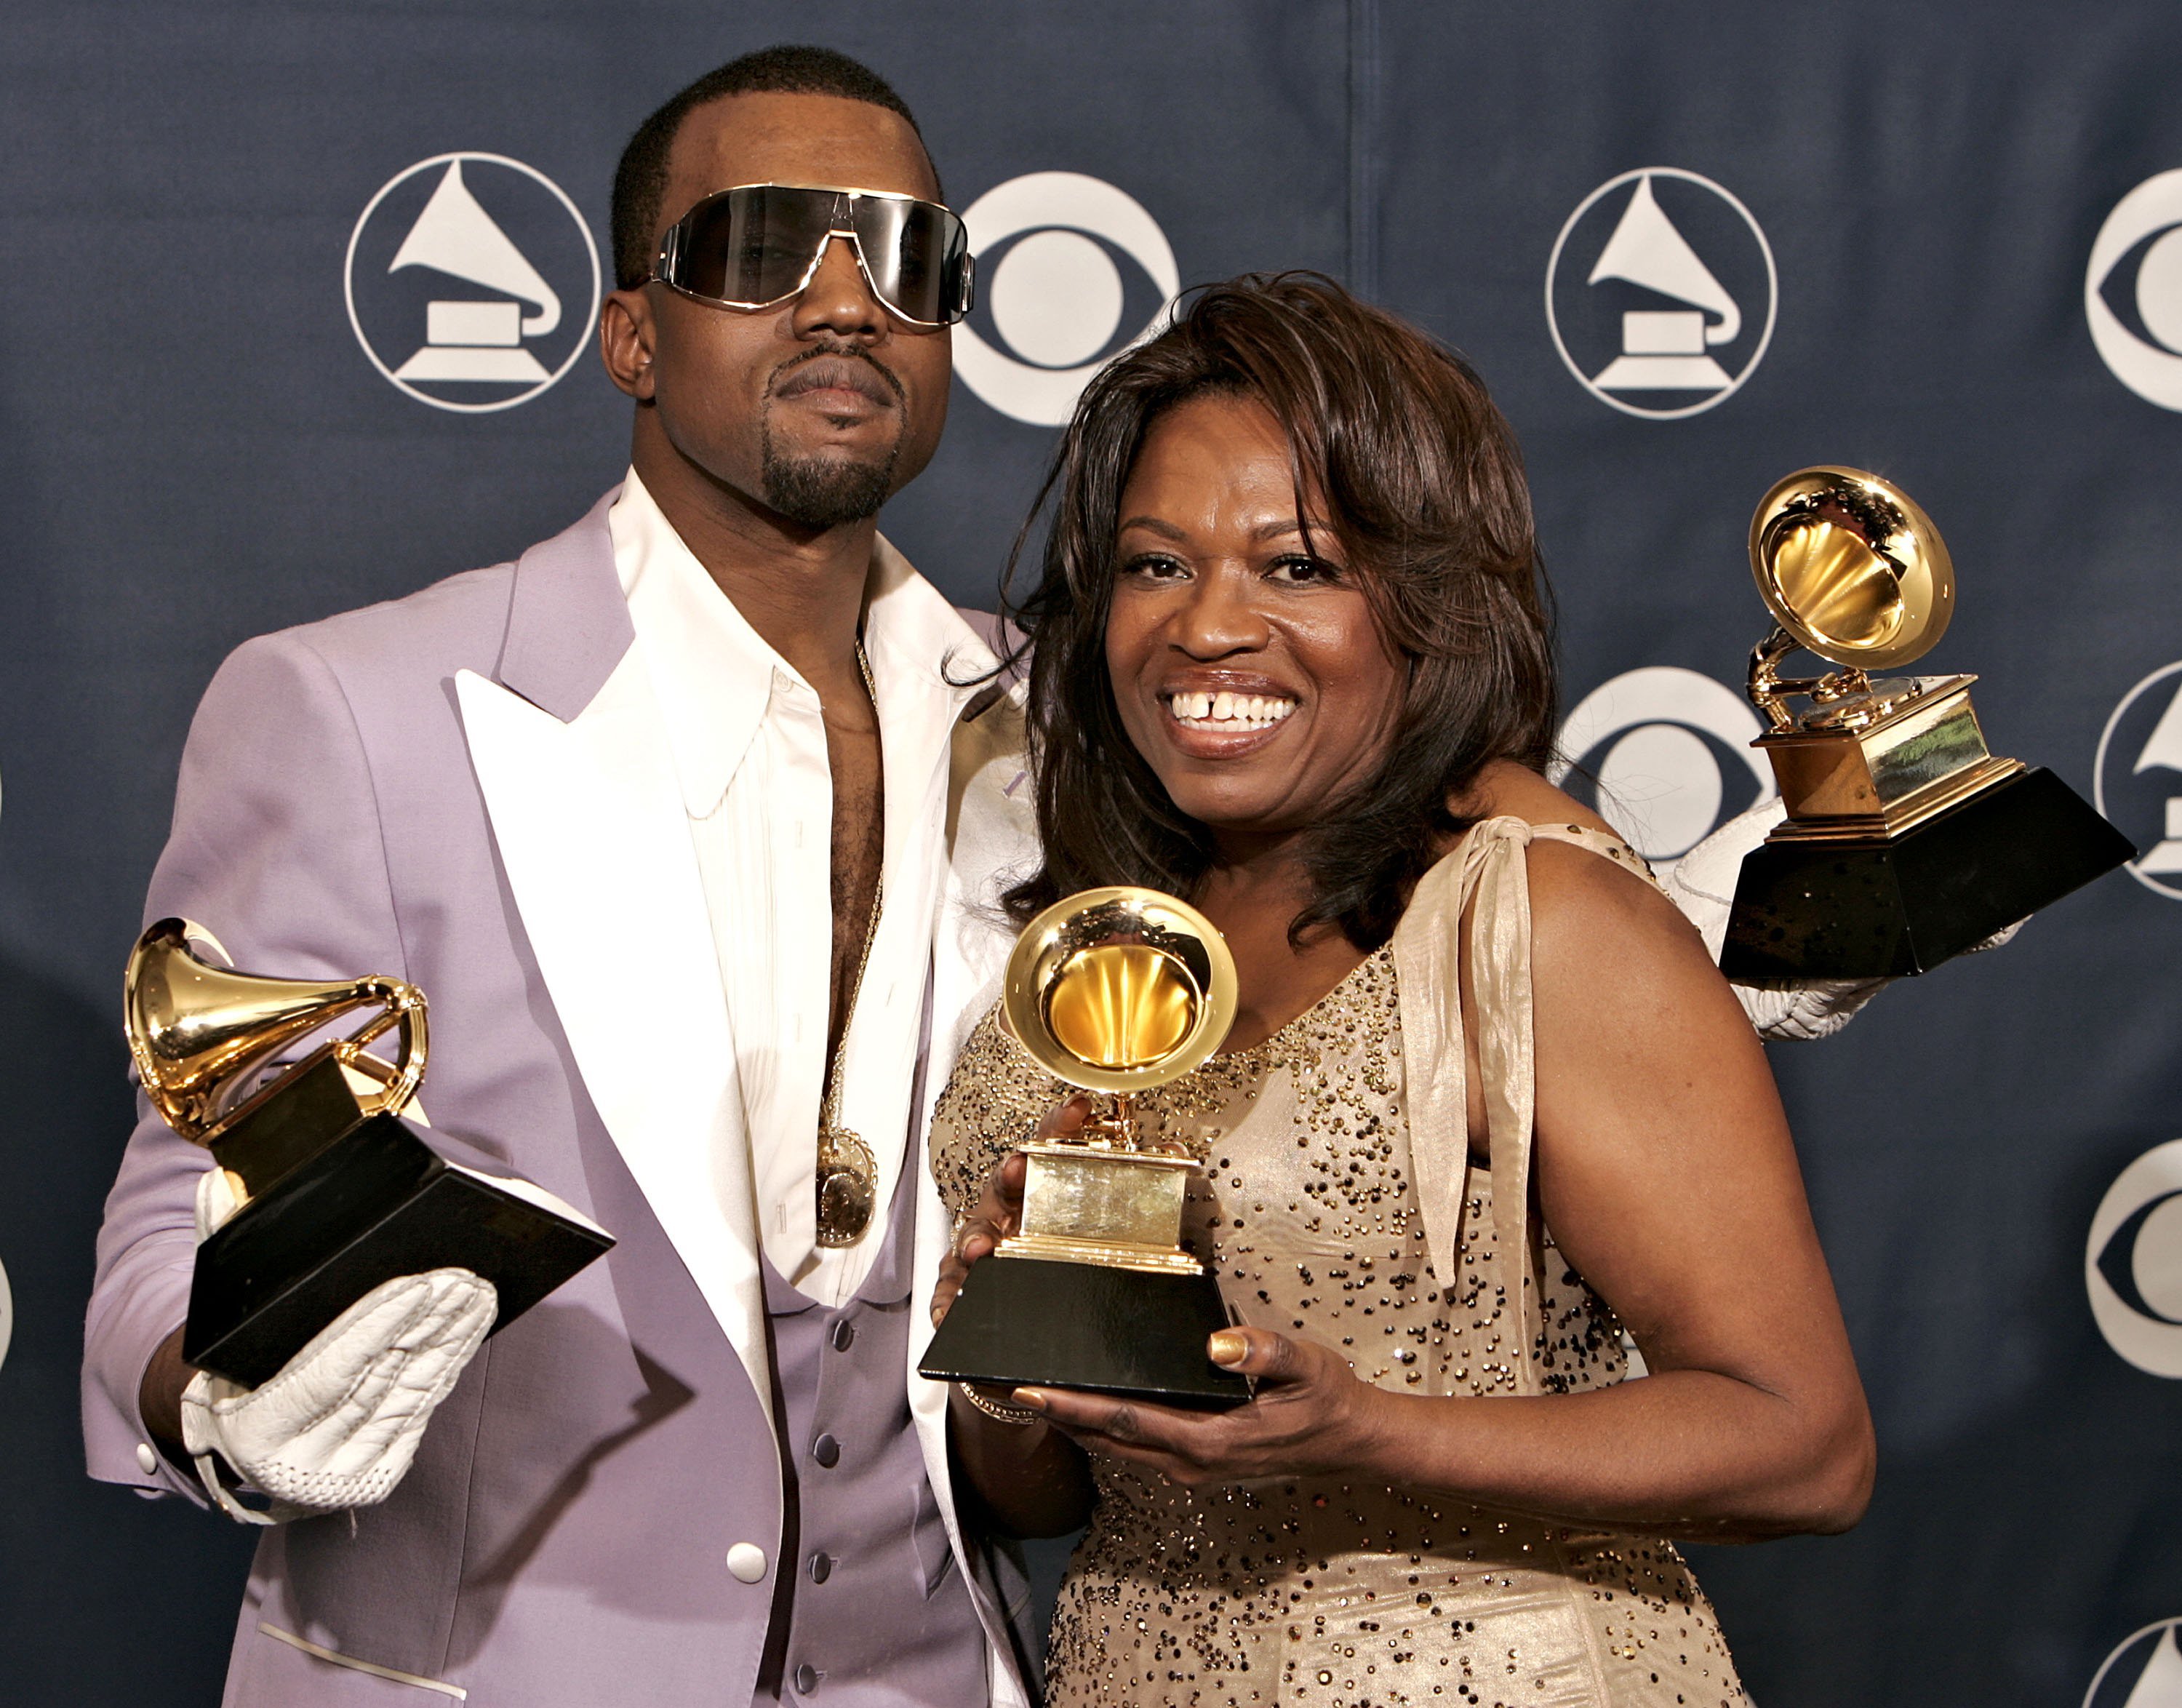 Kanye West and Donda West after the singer won awards at the 48th Annual Grammy Awards on February 8, 2006 | Source: Getty Images